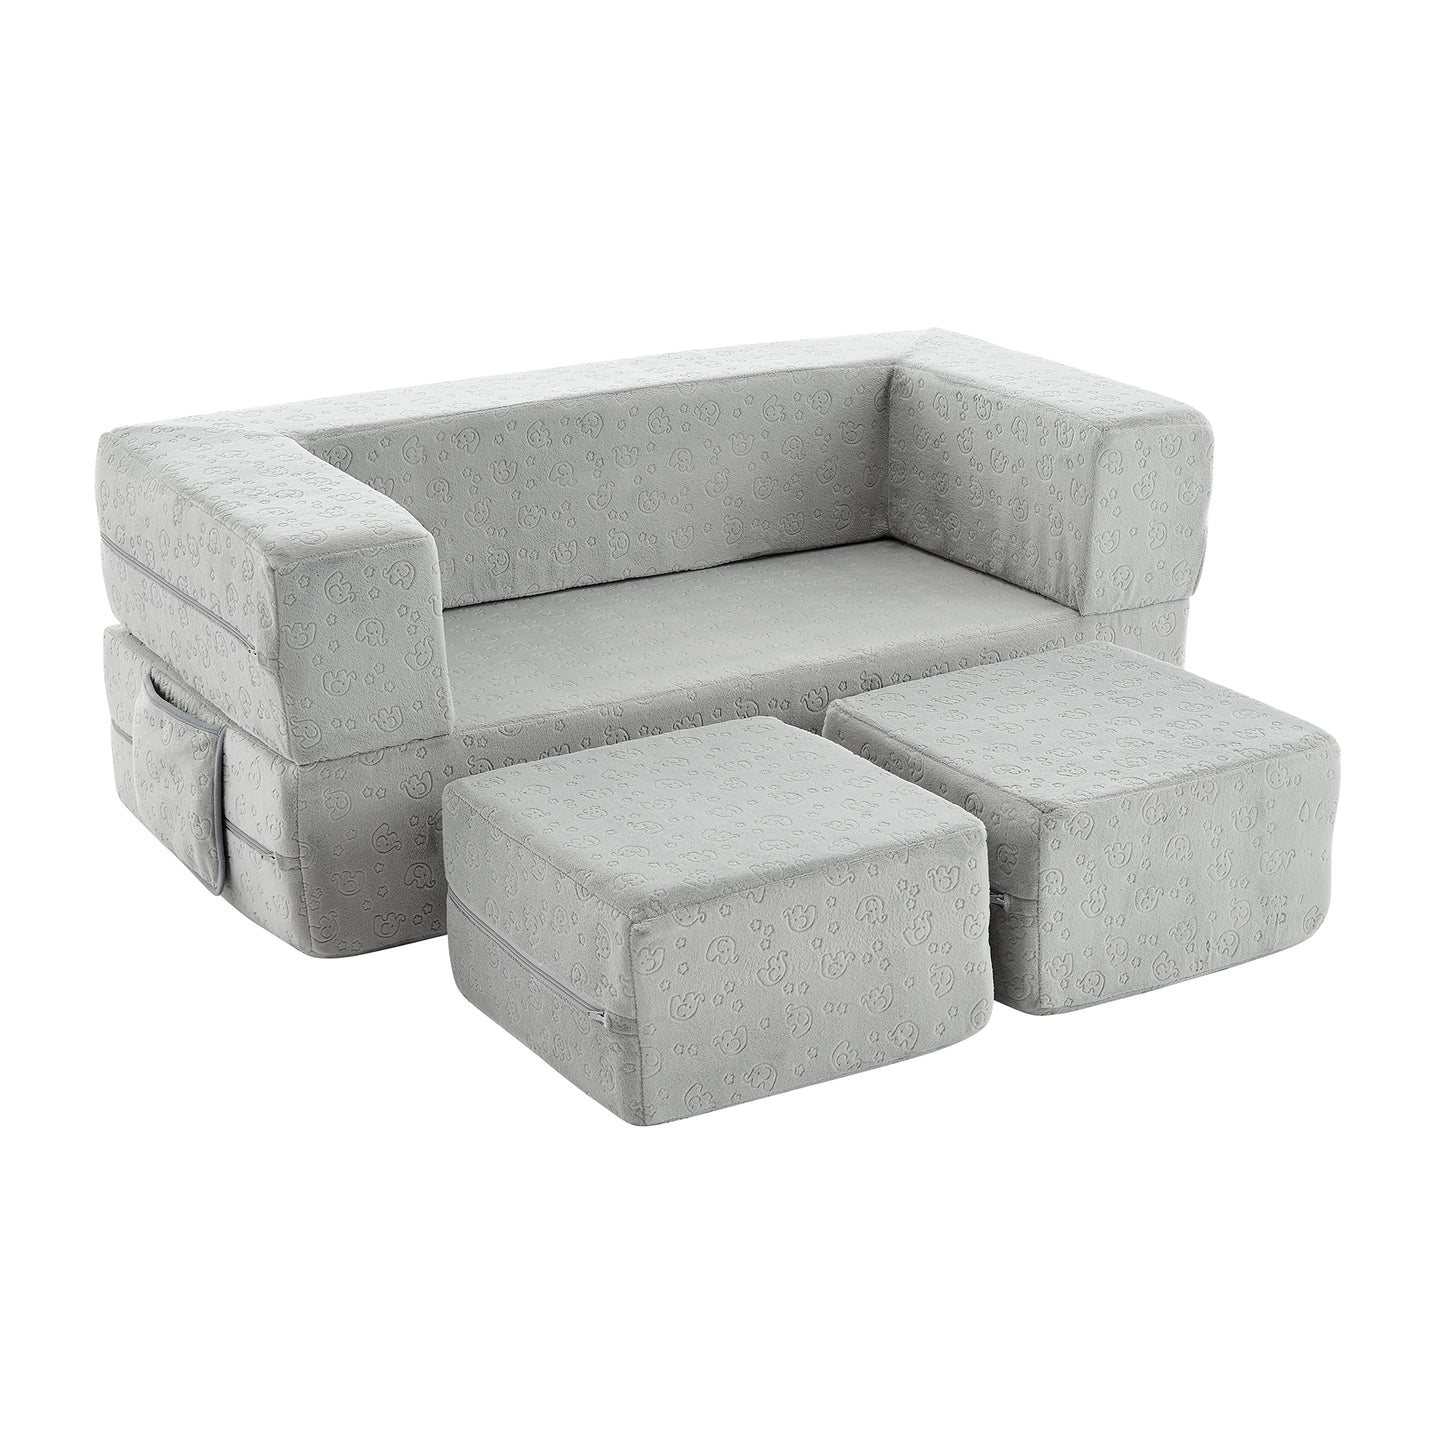 Modular Kids Loveseat/ Sleeper Sofa/ Play Set 3-in-1 Multi-Functional Toddler Convertible Flip Chair with 2 Ottomans, Gray